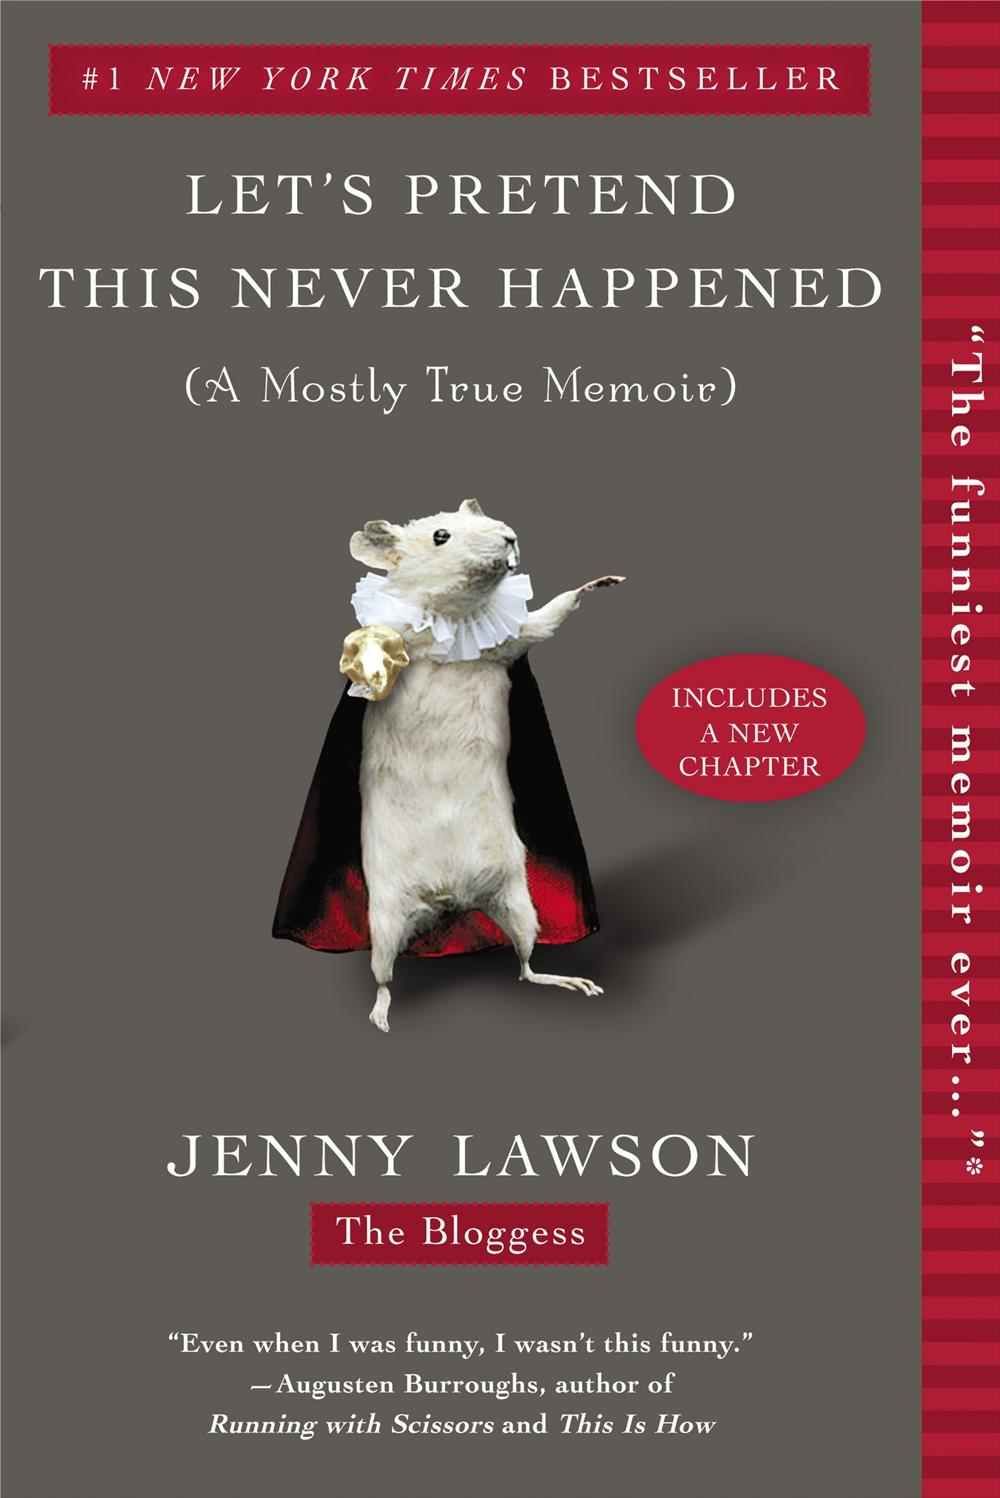 Let's Pretend This Never Happened by Jenny Lawson - book cover